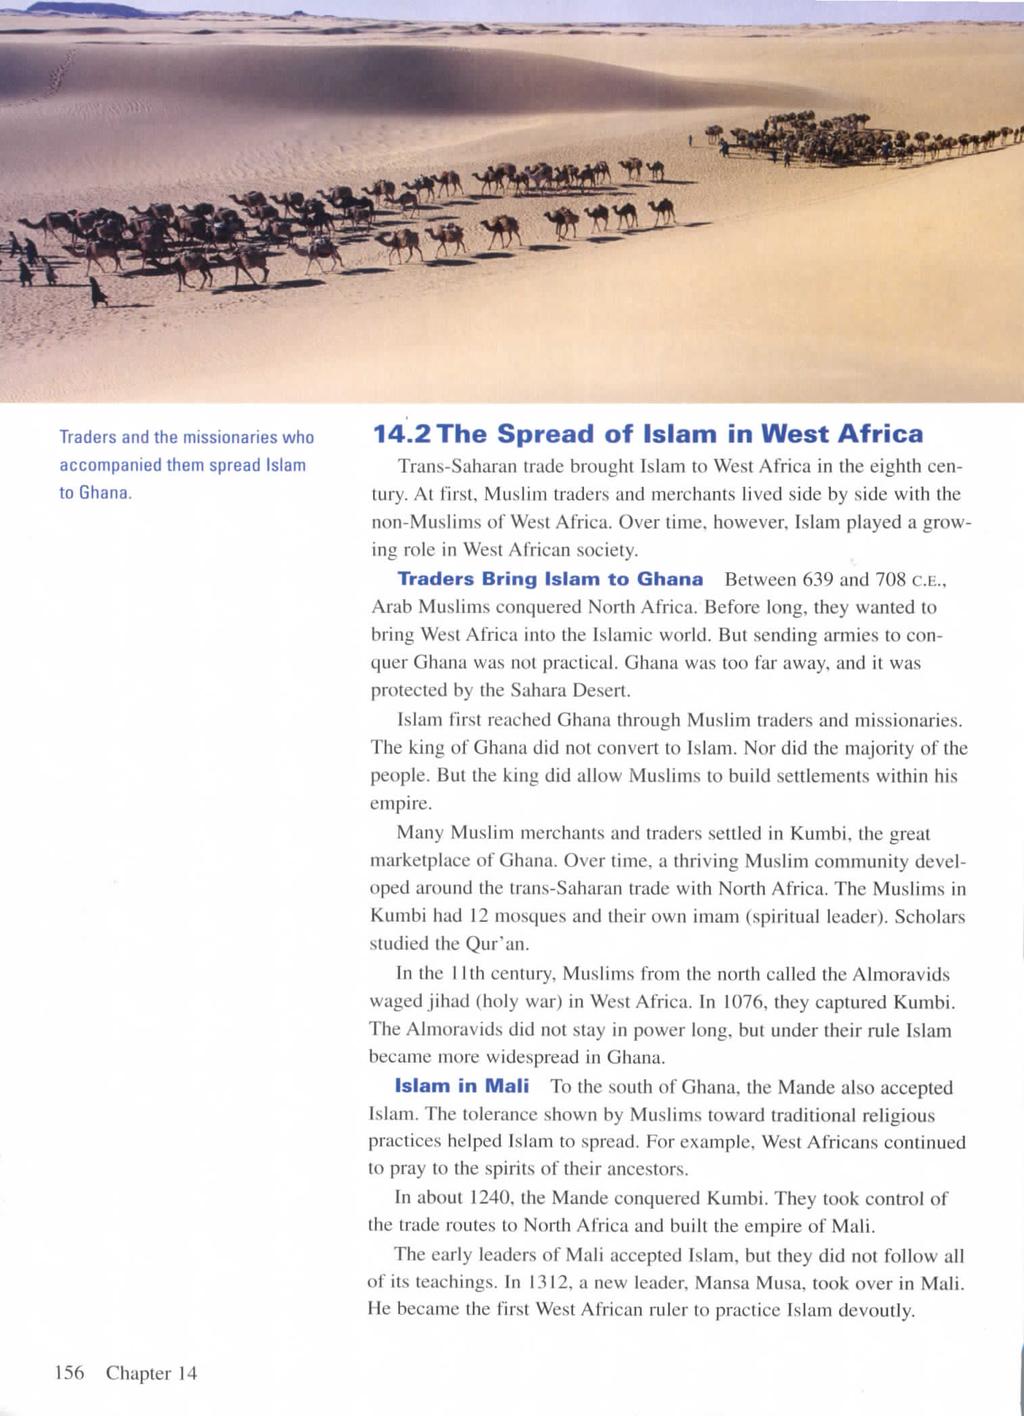 Traders and the missionaries who accompanied them spread Islam to Ghana. 14.2 The Spread of Islam in West Africa Trans-Saharan trade brought Islam to West Africa in the eighth century.